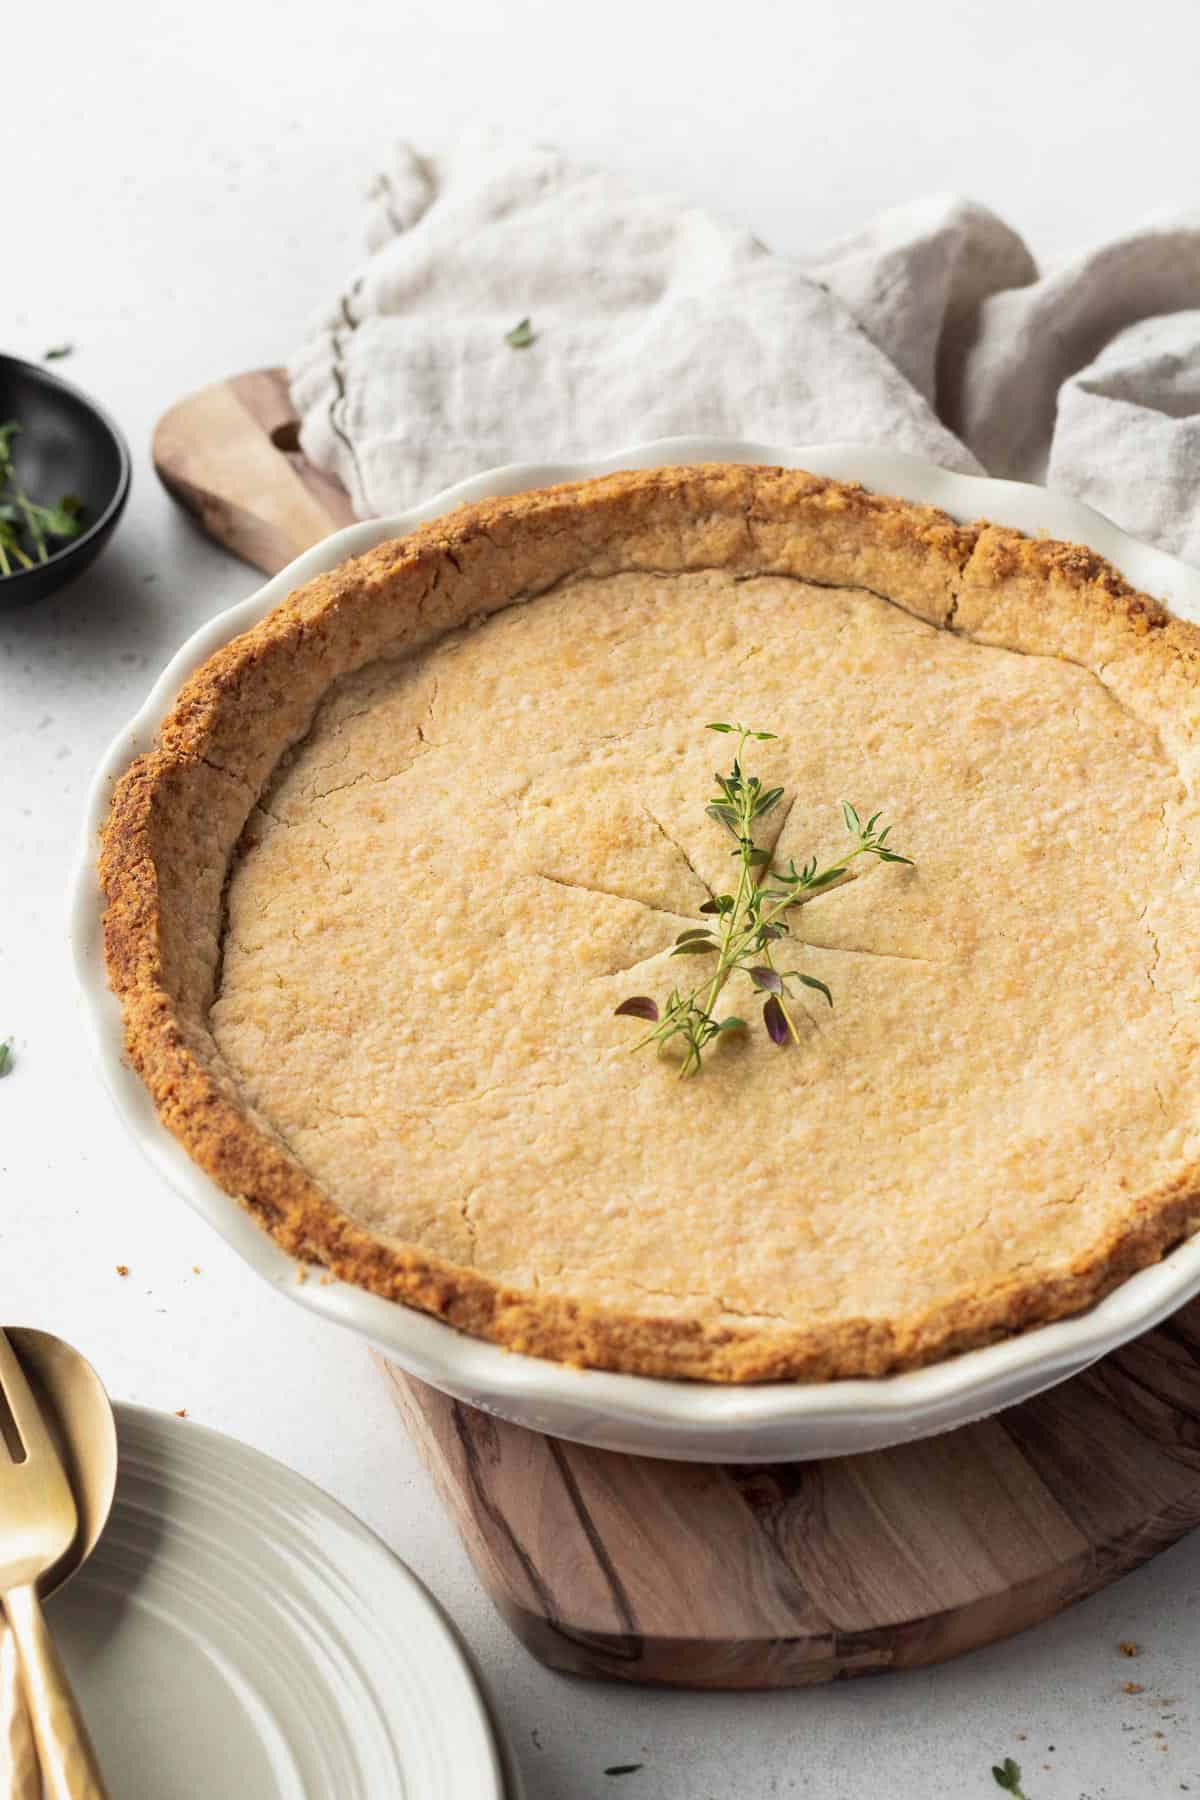 A whole vegan pot pie in a white ceramic pie dish with a few sprigs of thyme on top.